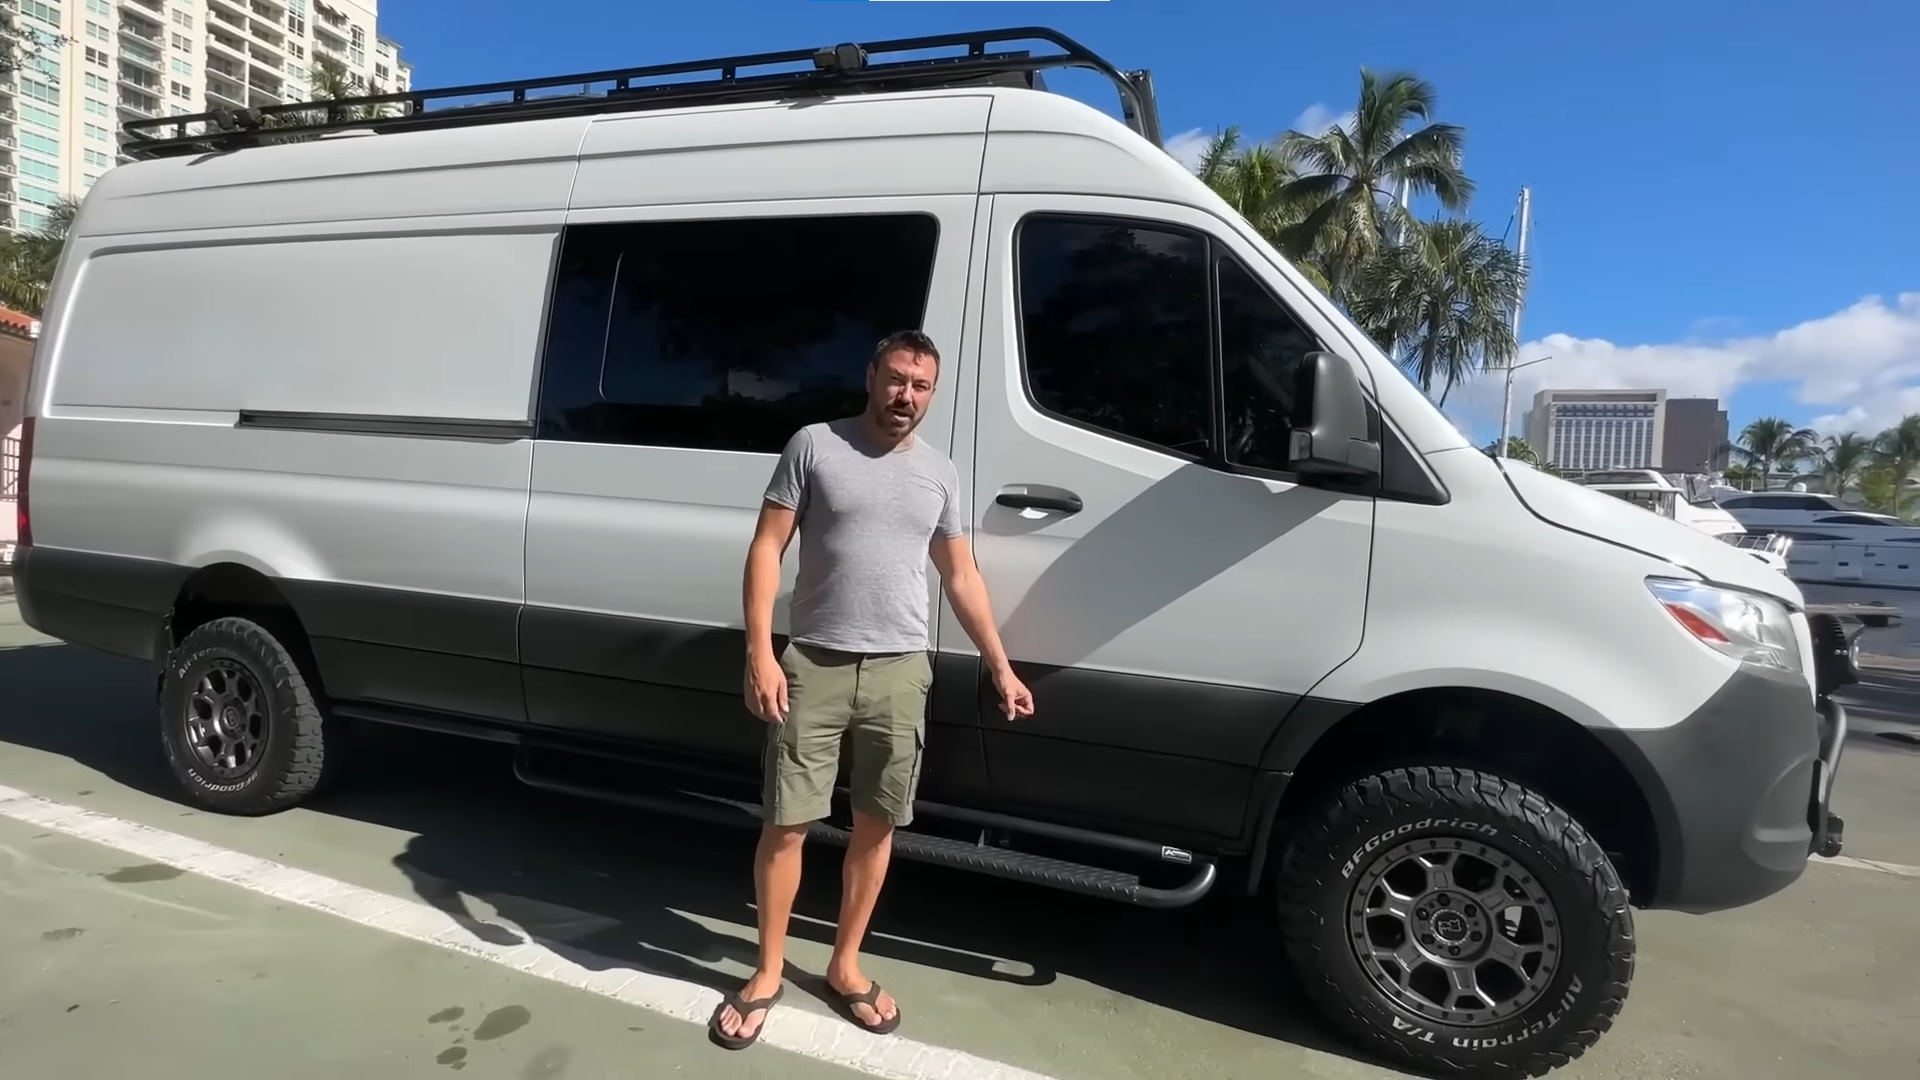 https://s1.cdn.autoevolution.com/images/news/mercedes-sprinter-camper-van-comes-with-off-road-upgrades-and-an-indoor-exposed-shower-215834_1.jpg